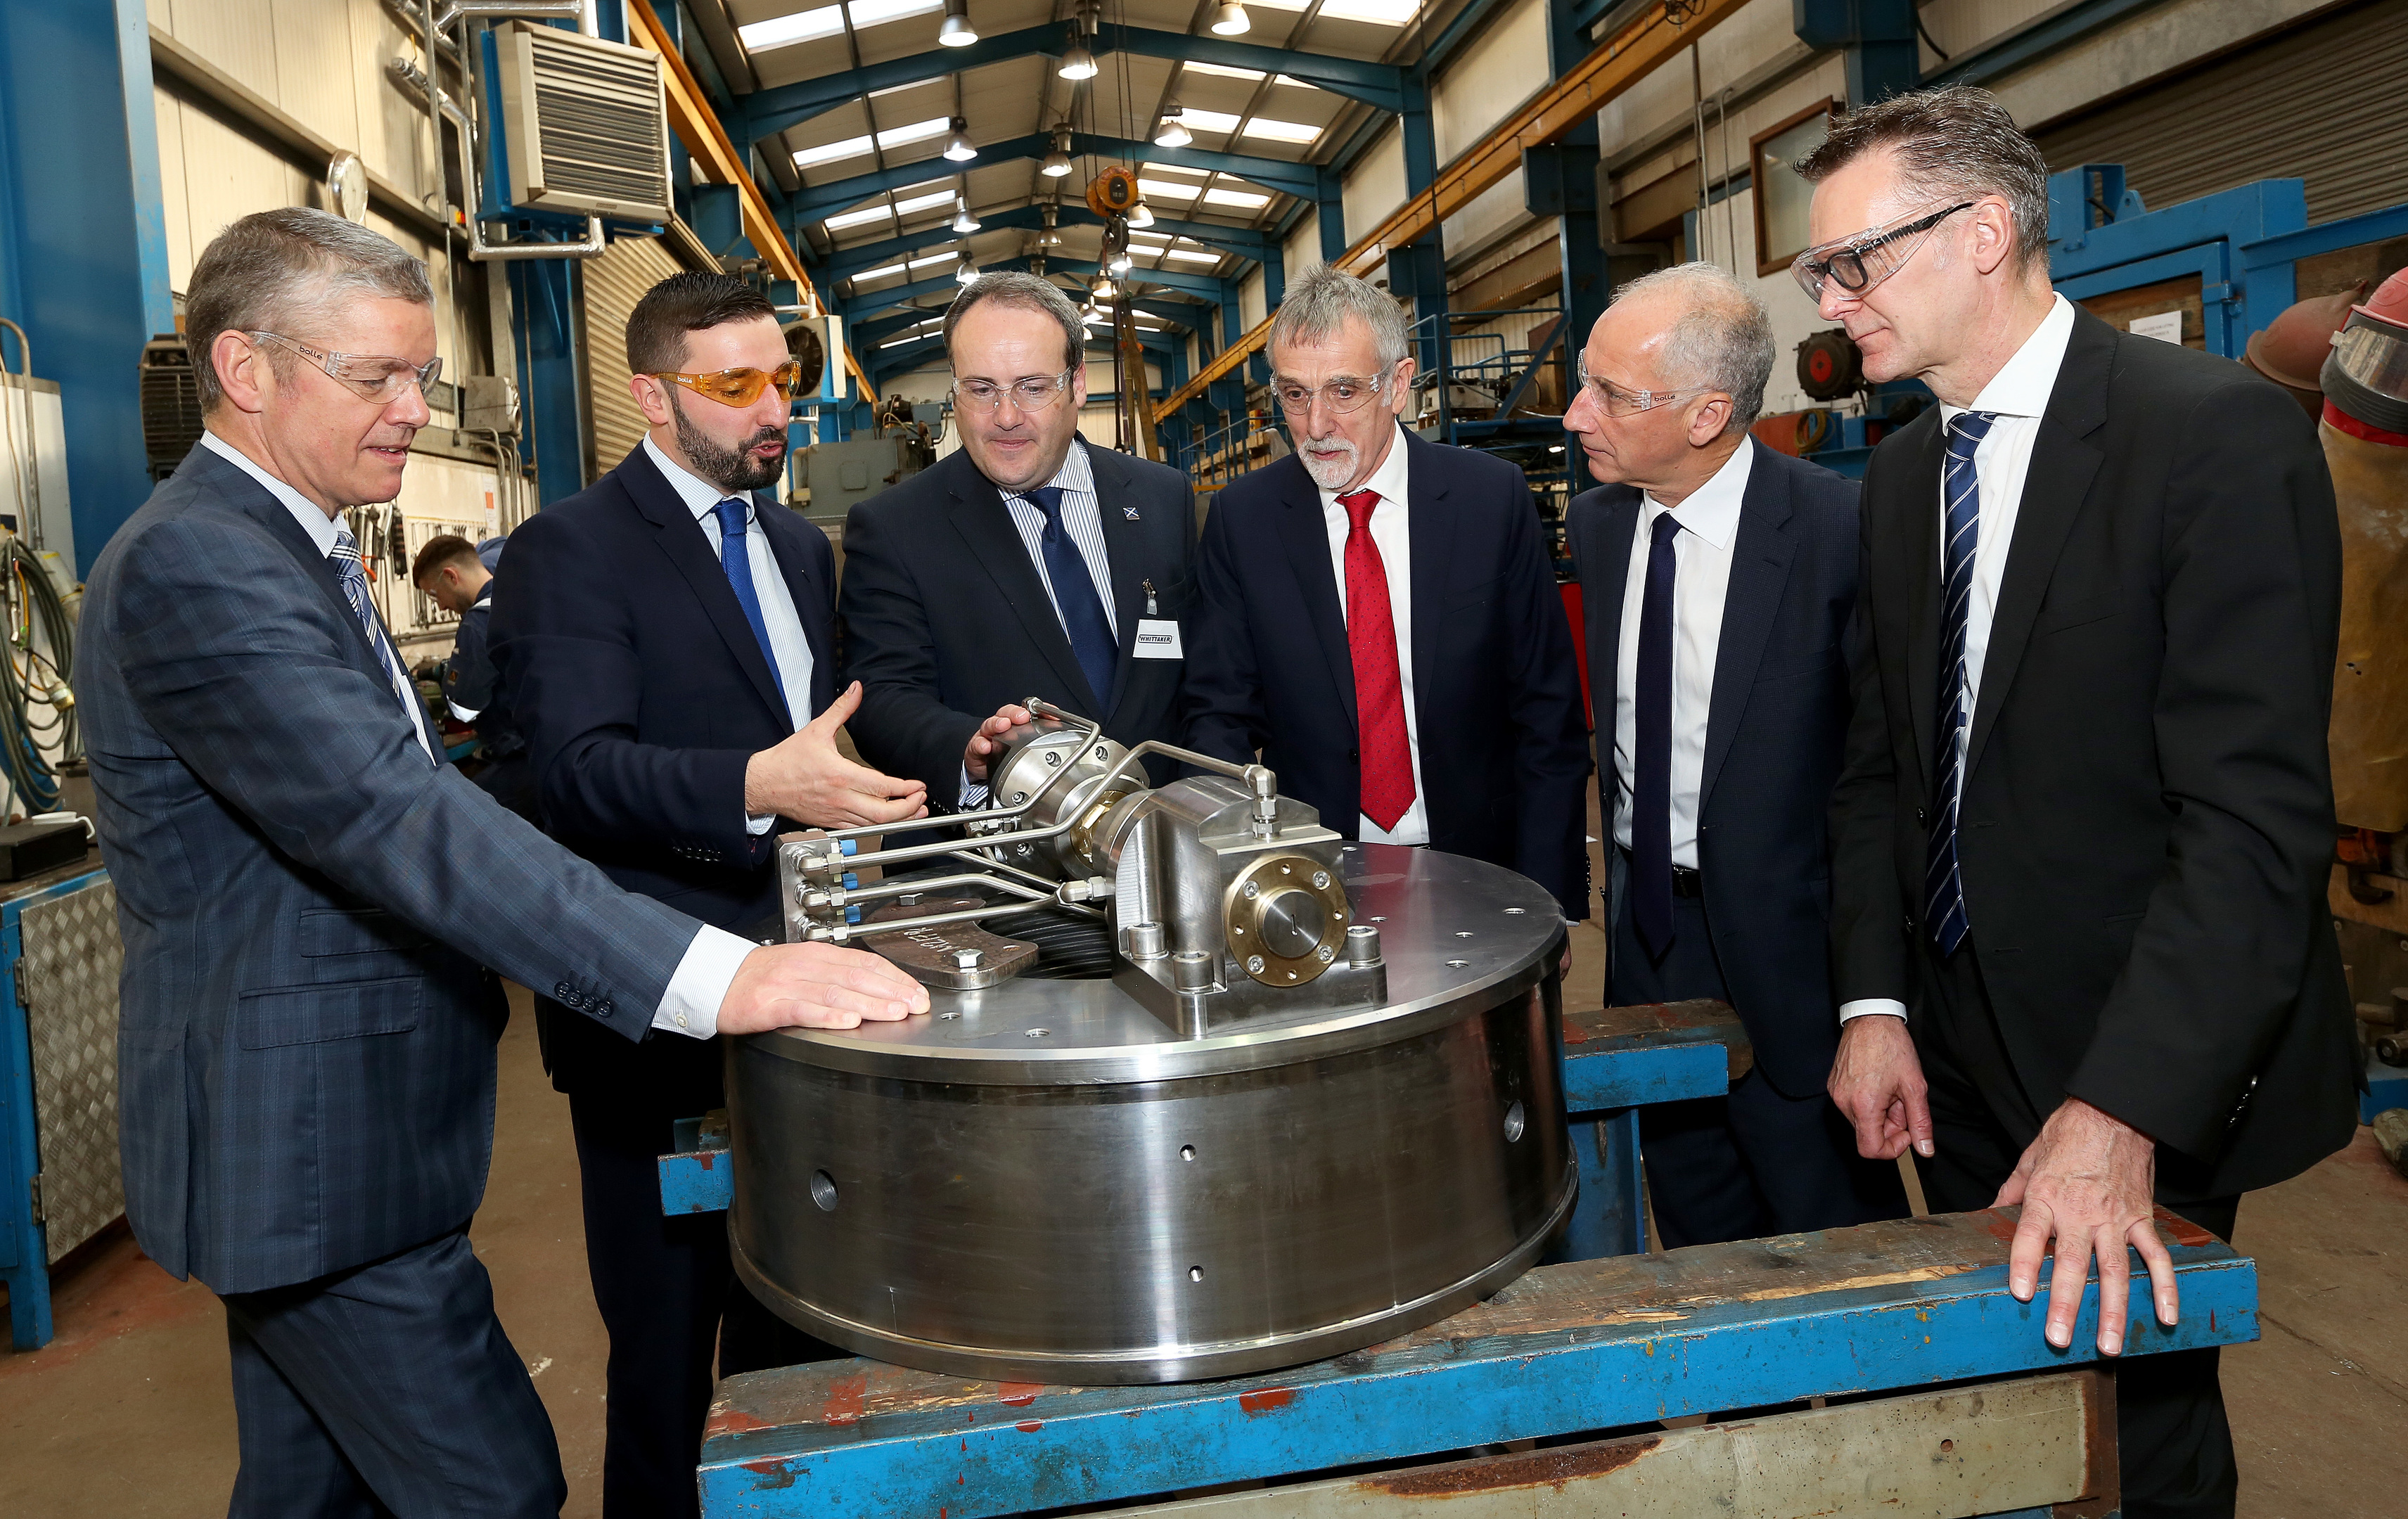 Energy minister Paul Wheelhouse, third from left, made the announcement during a visit to Whittaker Engineering near Stonehaven